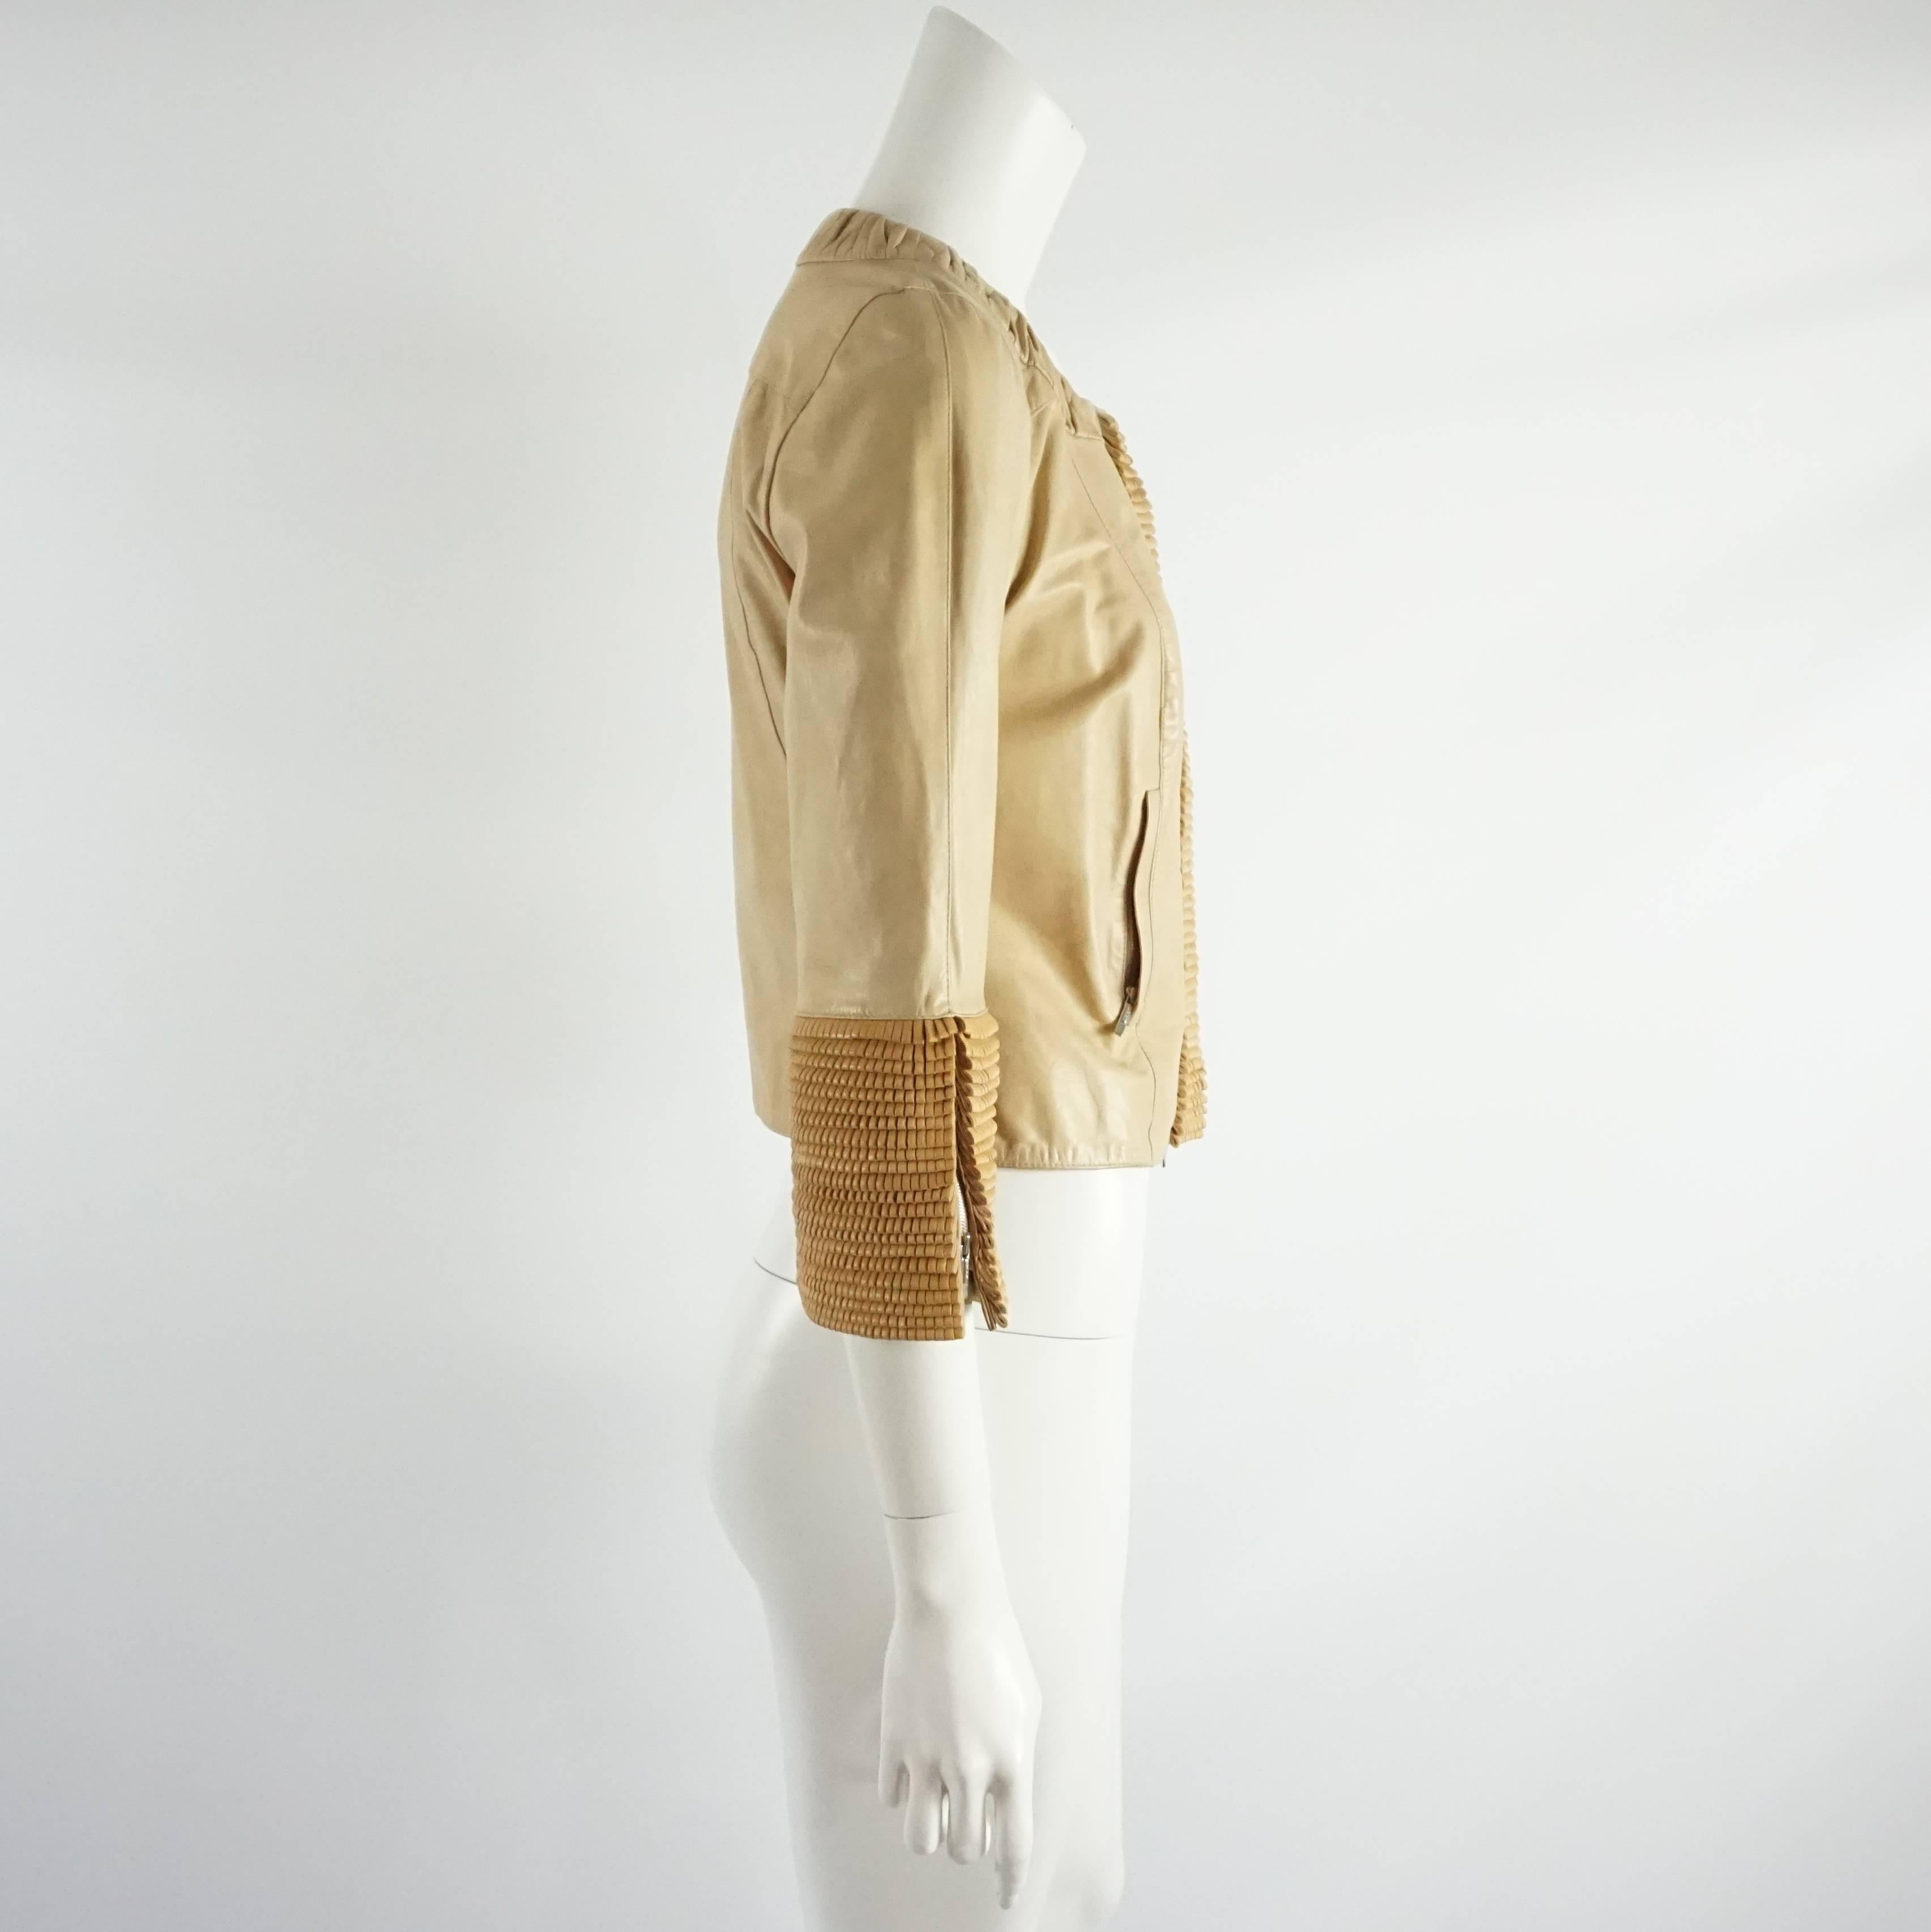 This Fendi tan leather jacket is a unique piece. It features a round neck with ruching, layered fringe loops, and zip closures in the center and cuffs and Bracelet Sleeve. Size 40.

It is in very good condition with light wear as seen in the